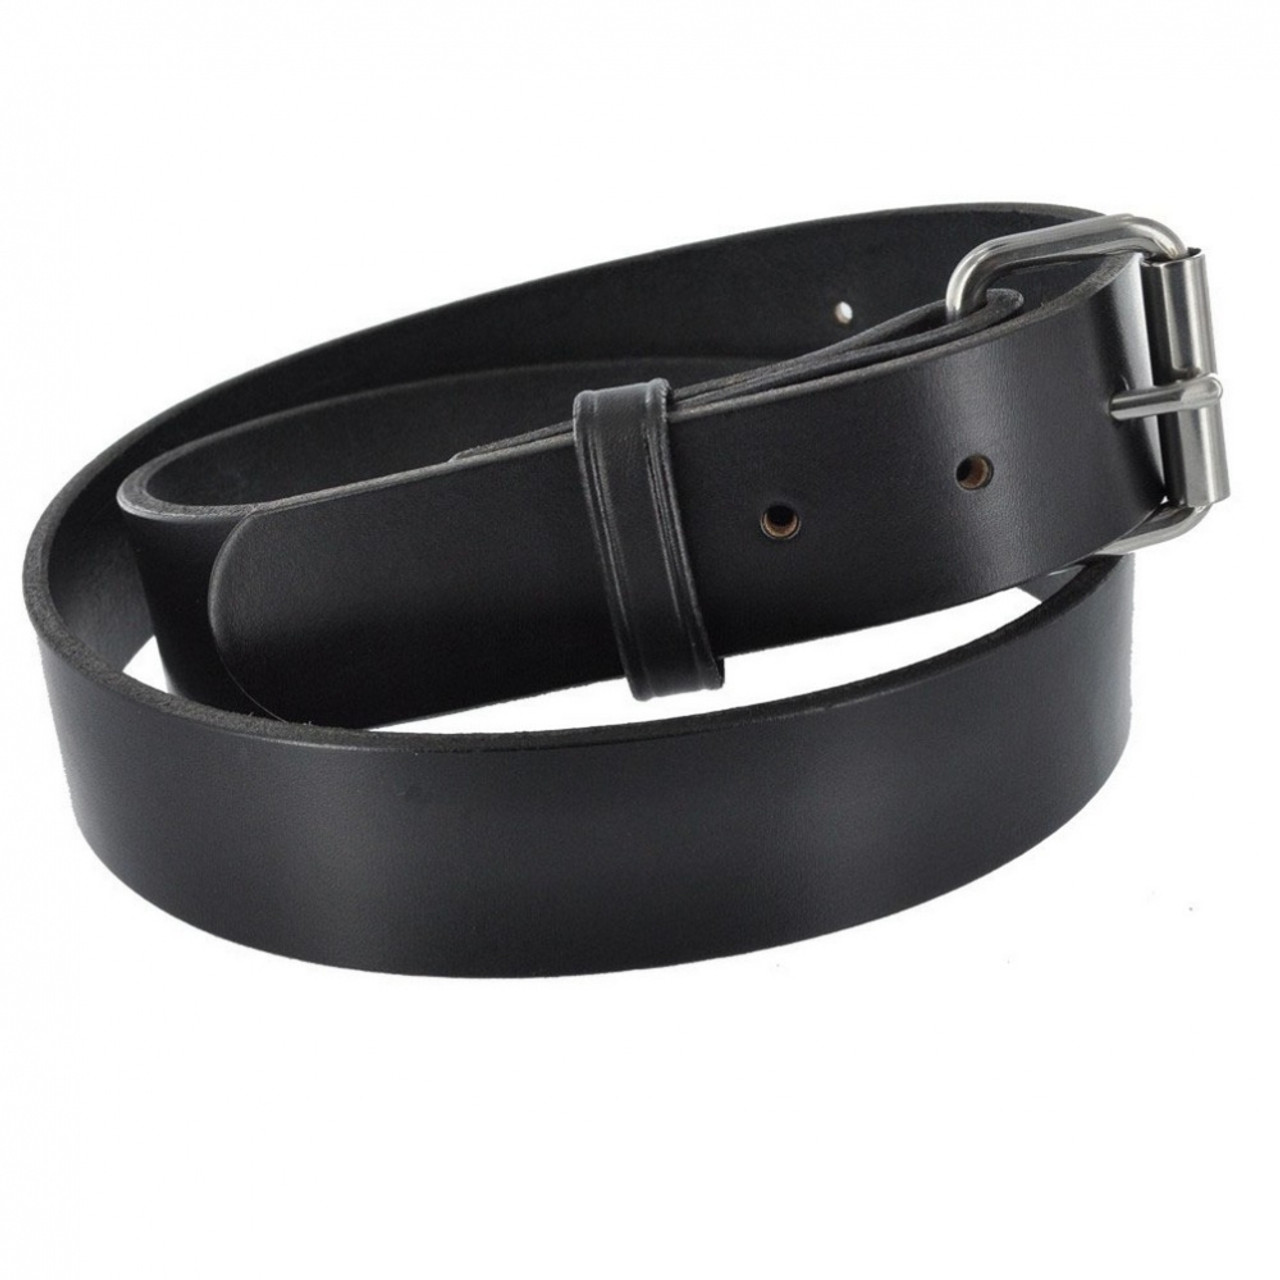 Amish-Made Casual/Work Leather Belts - 2 inch Wide - Black 50